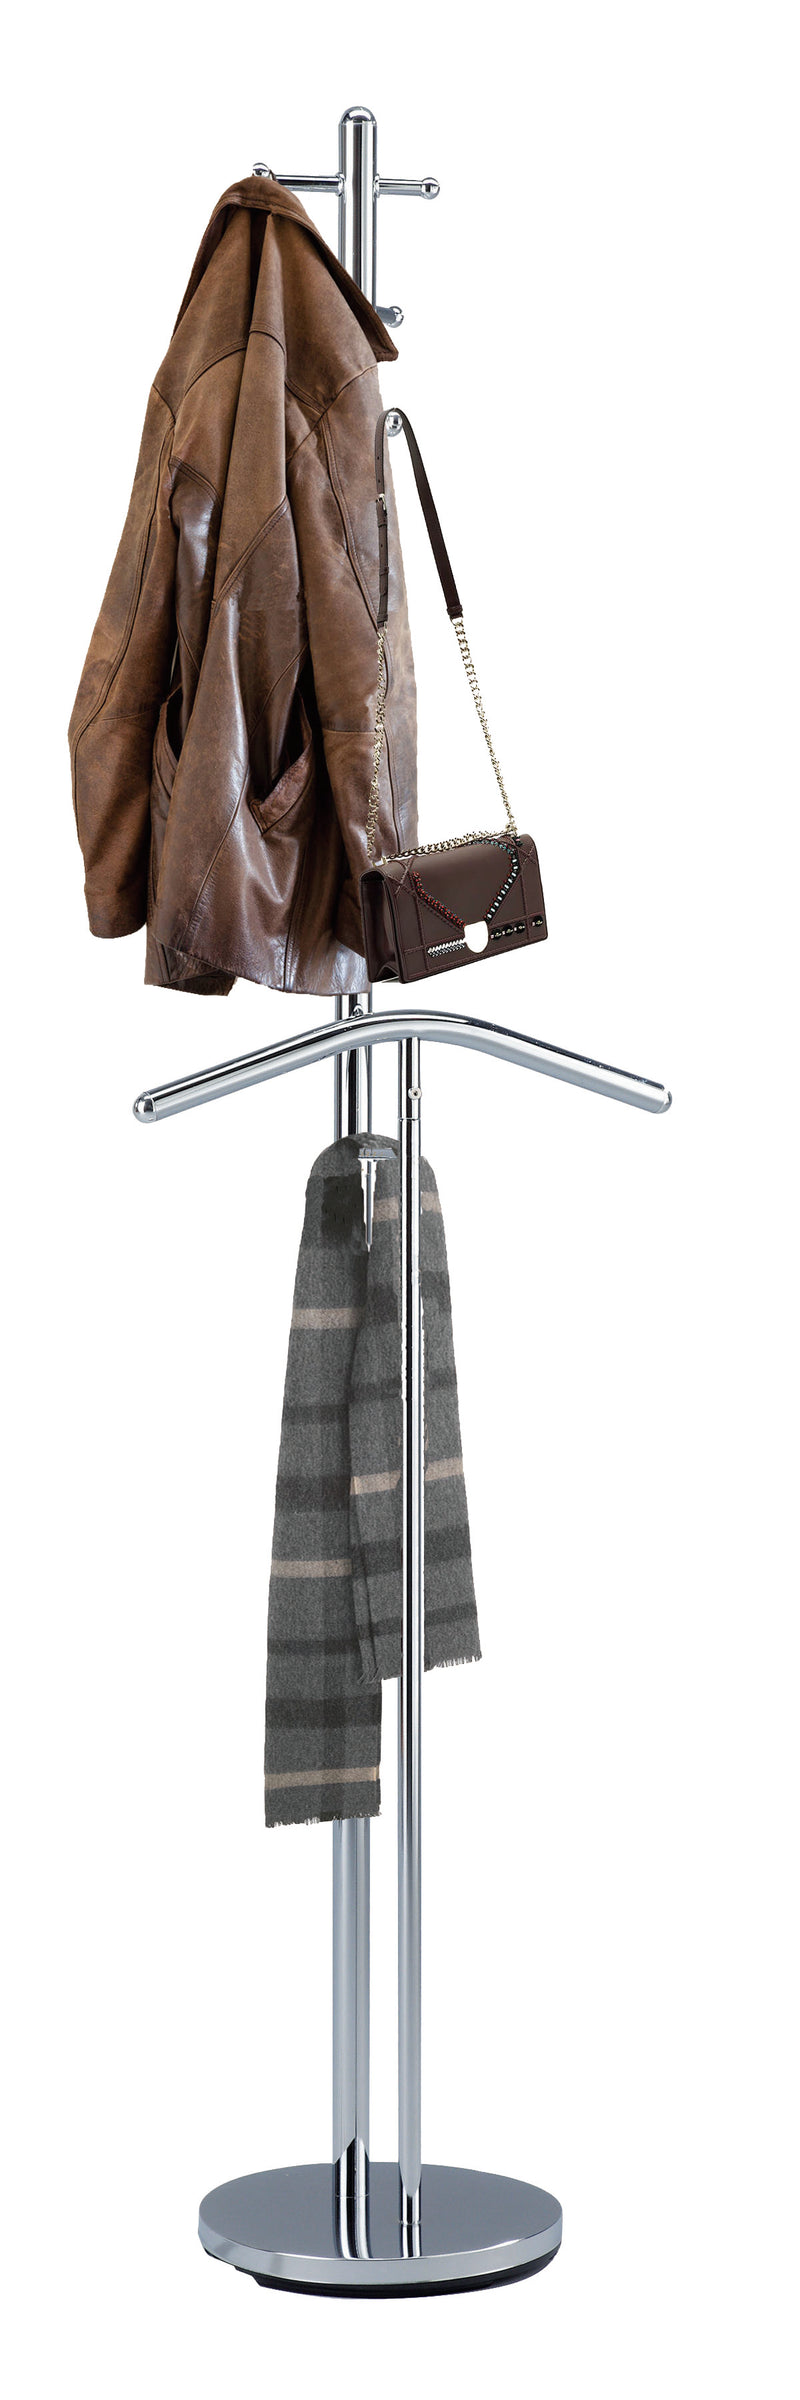 Ethan Free Standing Coat Stand w/ Suit Butler/Silver Clothes Valet Stand (6024398340259)